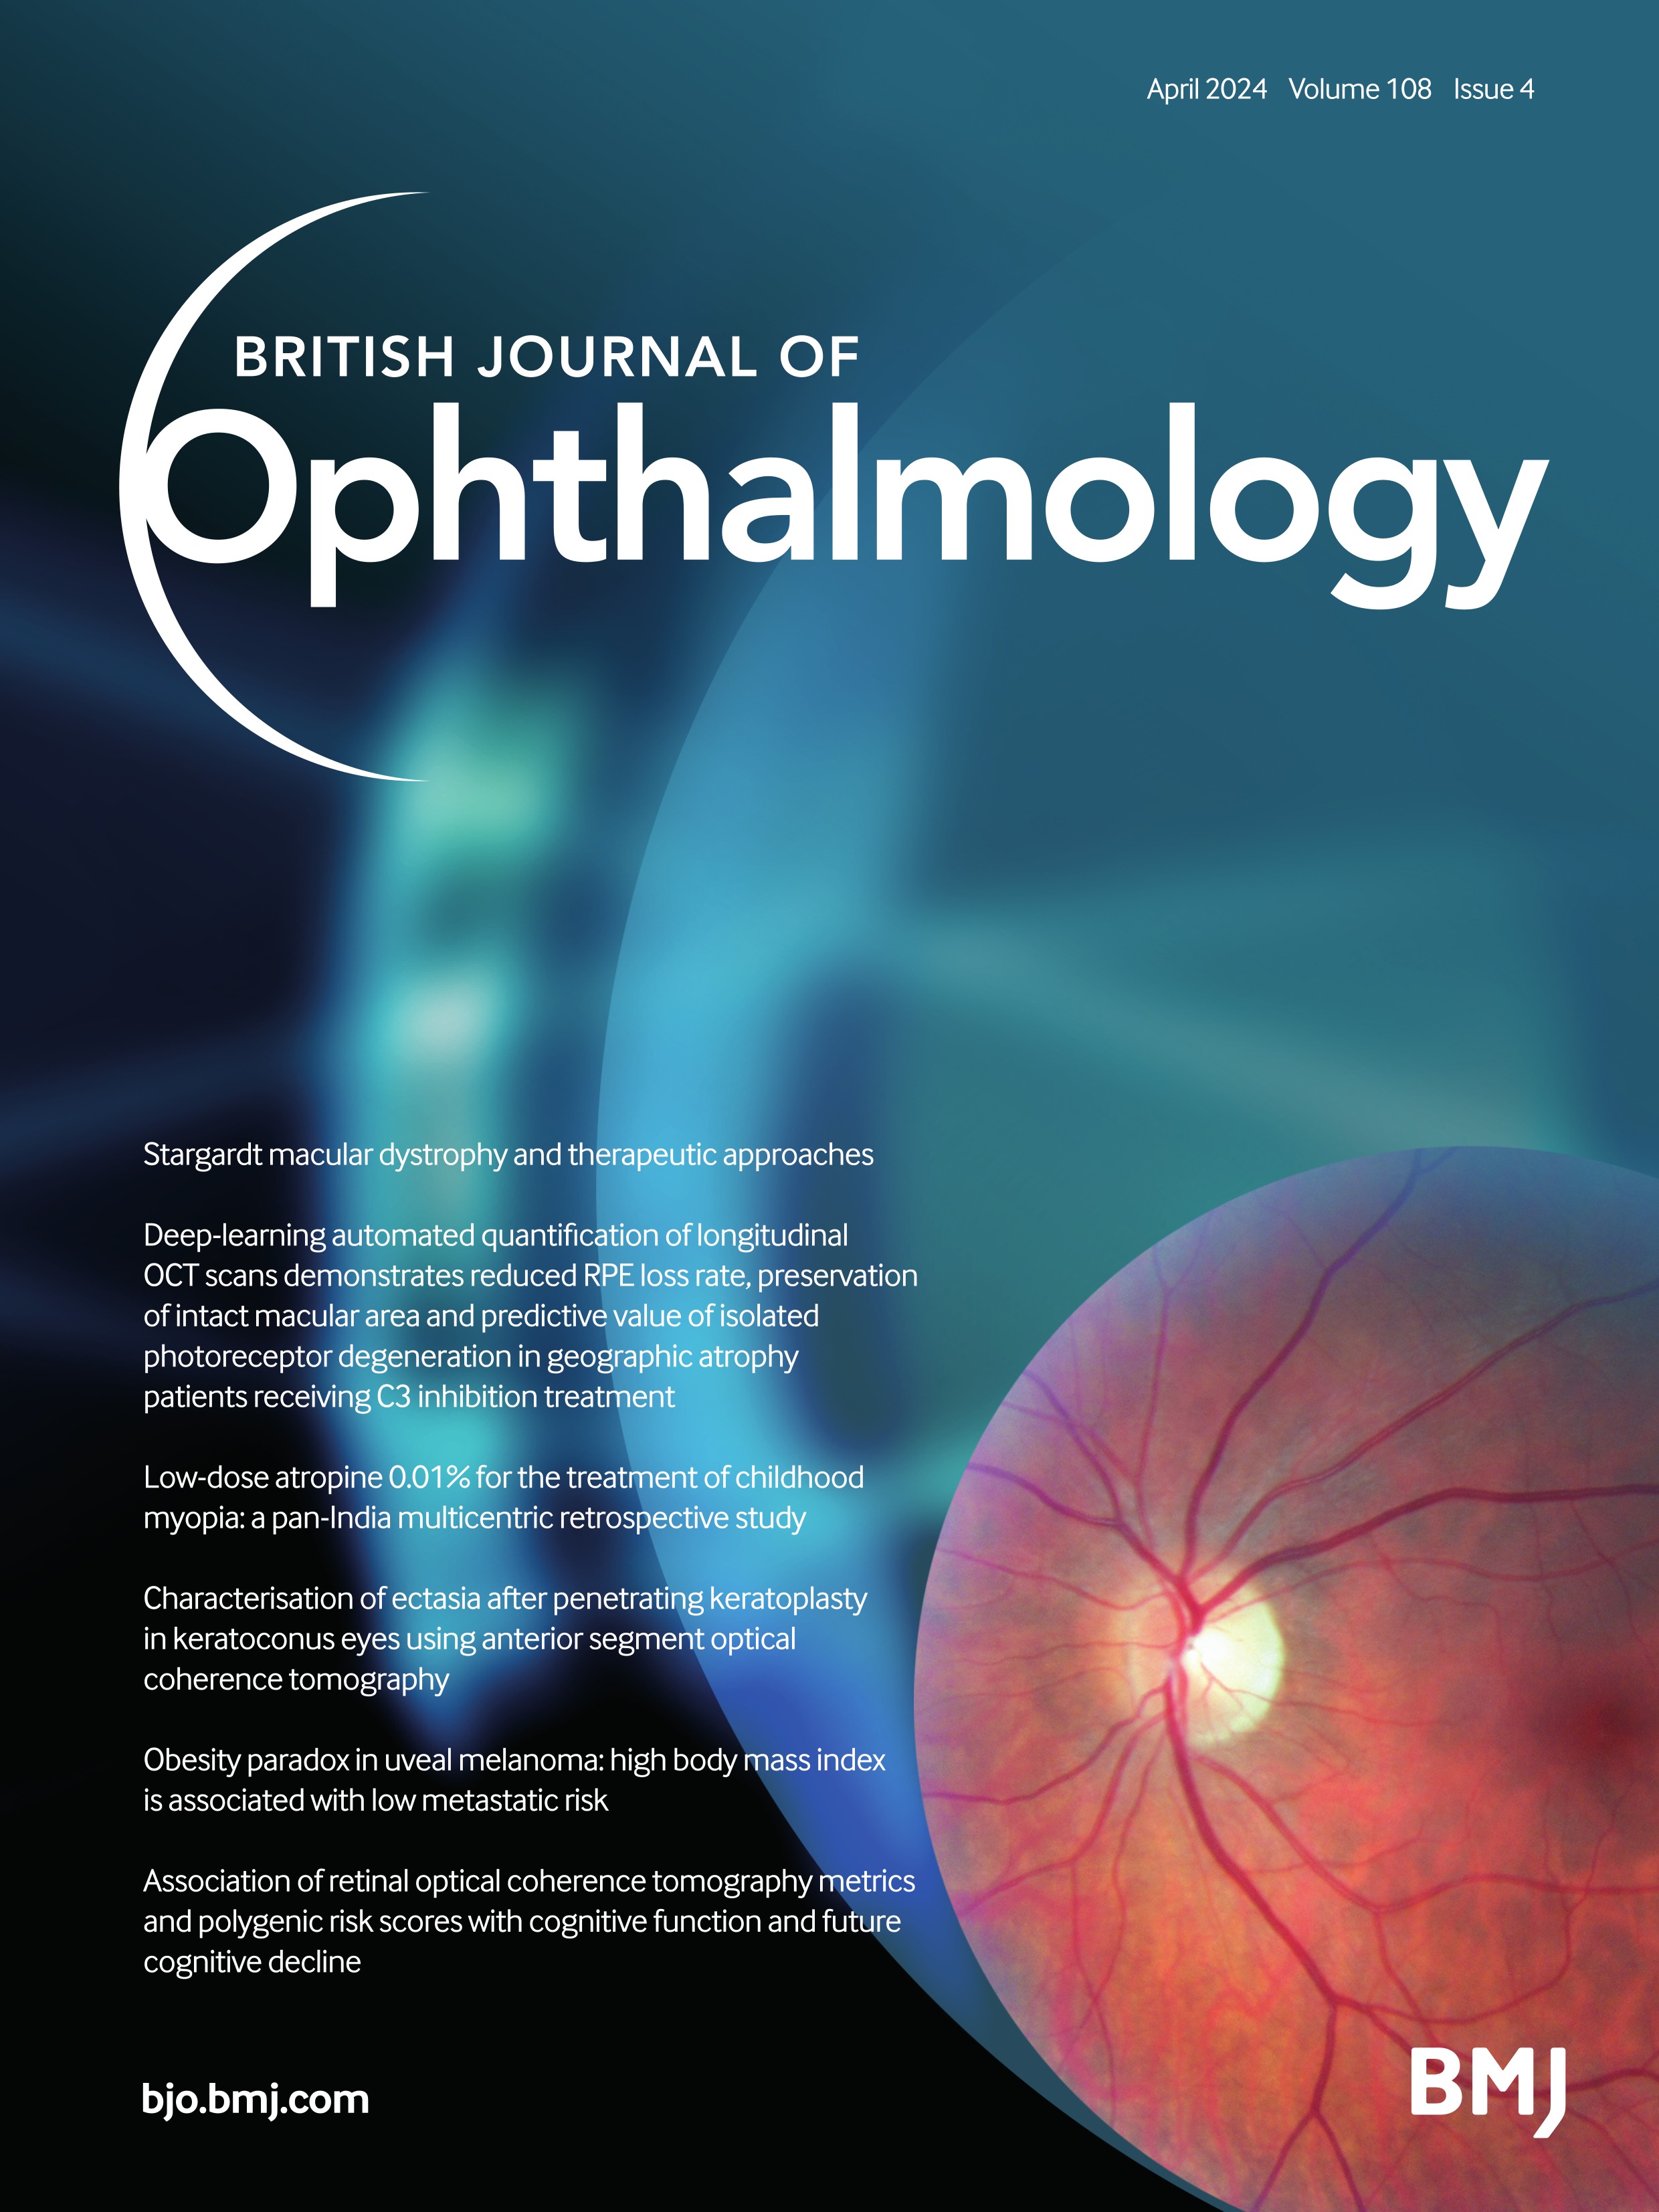 Deep-learning automated quantification of longitudinal OCT scans demonstrates reduced RPE loss rate, preservation of intact macular area and predictive value of isolated photoreceptor degeneration in geographic atrophy patients receiving C3 inhibition treatment